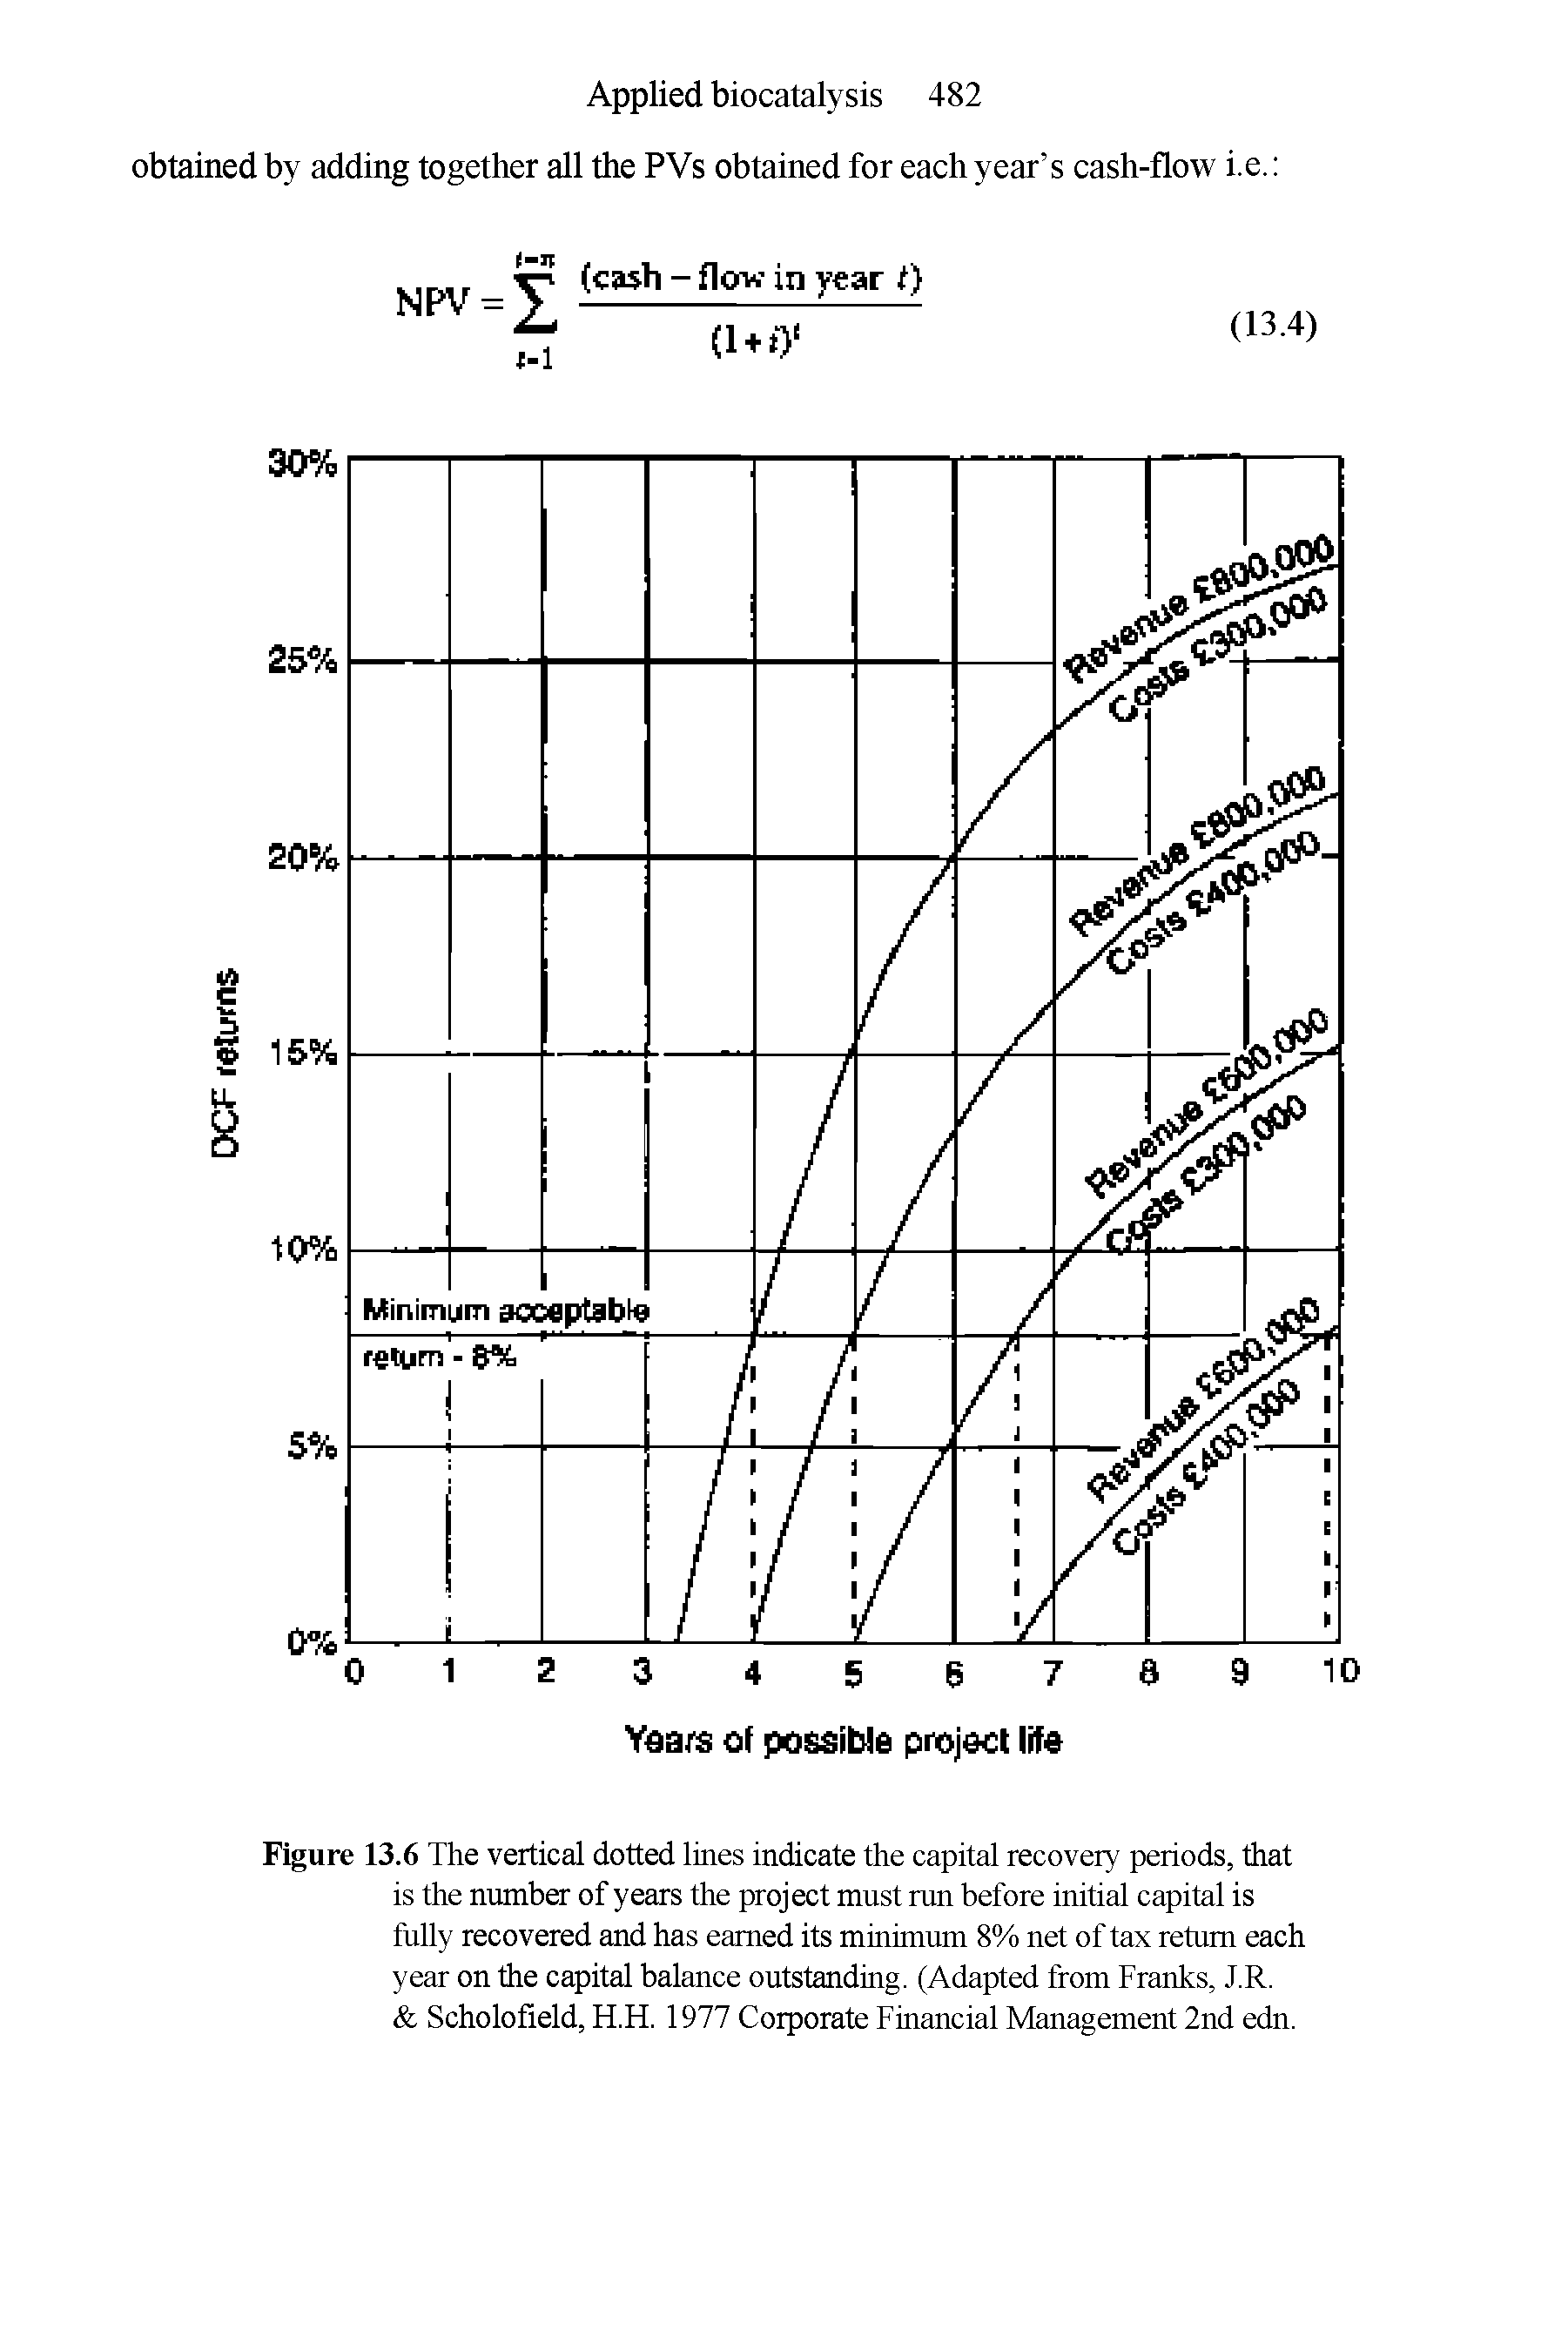 Figure 13.6 The vertical dotted lines indicate the capital recovery periods, that is the number of years the project must run before initial capital is fully recovered and has earned its minimum 8% net of tax return each year on the capital balance outstanding. (Adapted from Franks, J.R.